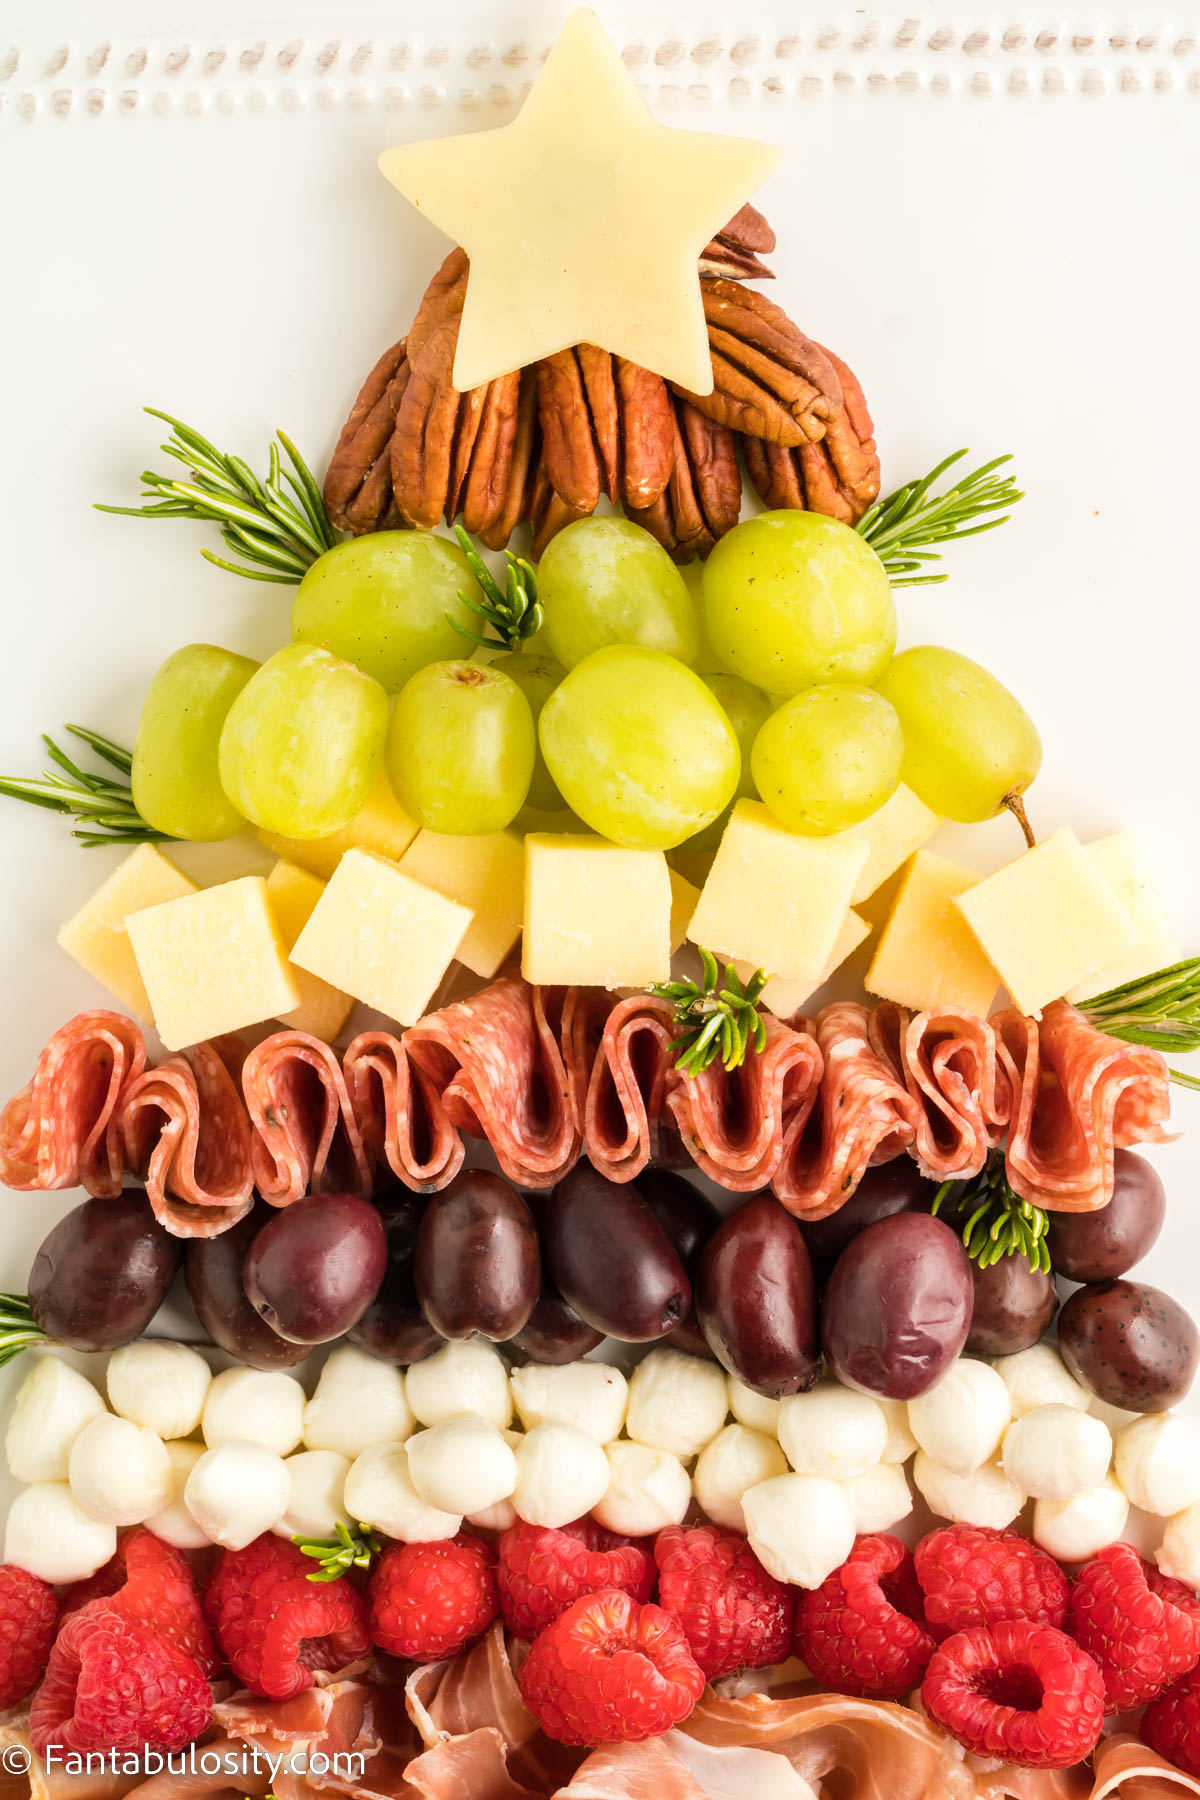 Close up photo of meat, cheese, fruit and nuts that has been arranged in the shape of a Christmas tree with a star shaped piece of cheese at the top